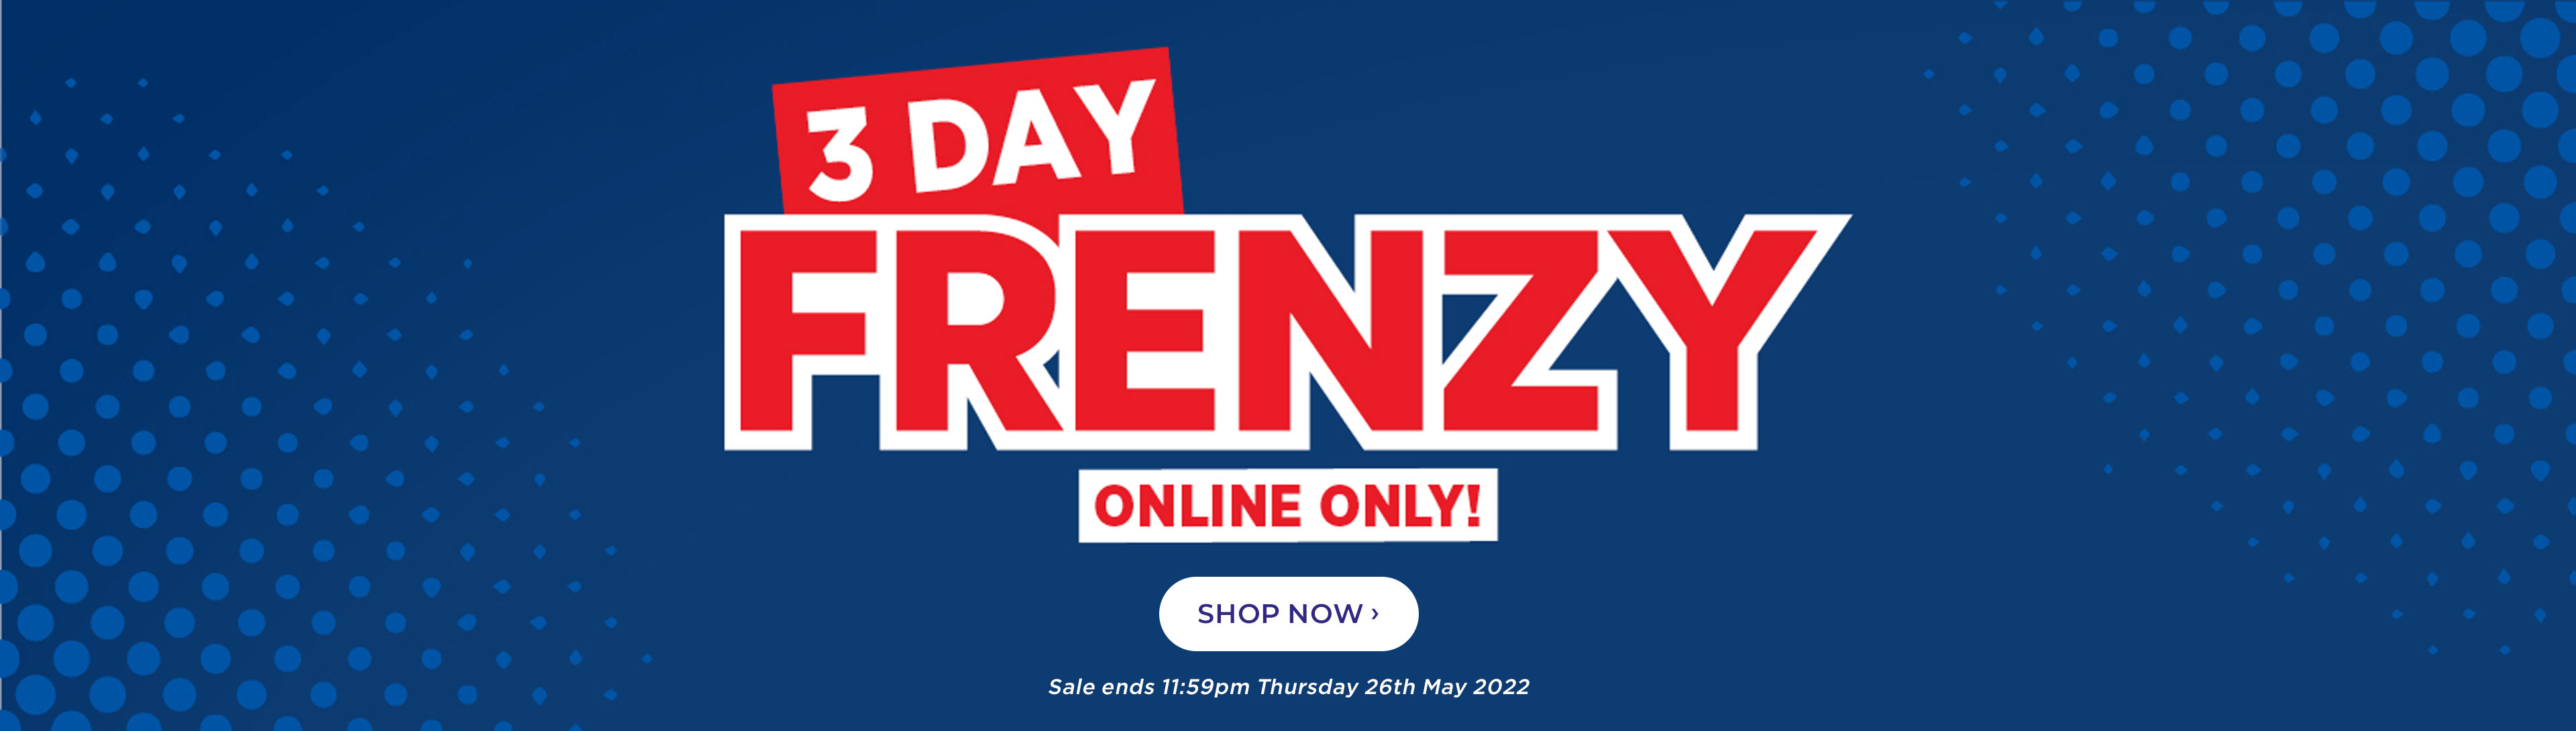 Spotlight Frenzy sale up to 50% OFF on fabrics, curtains, decor items & more